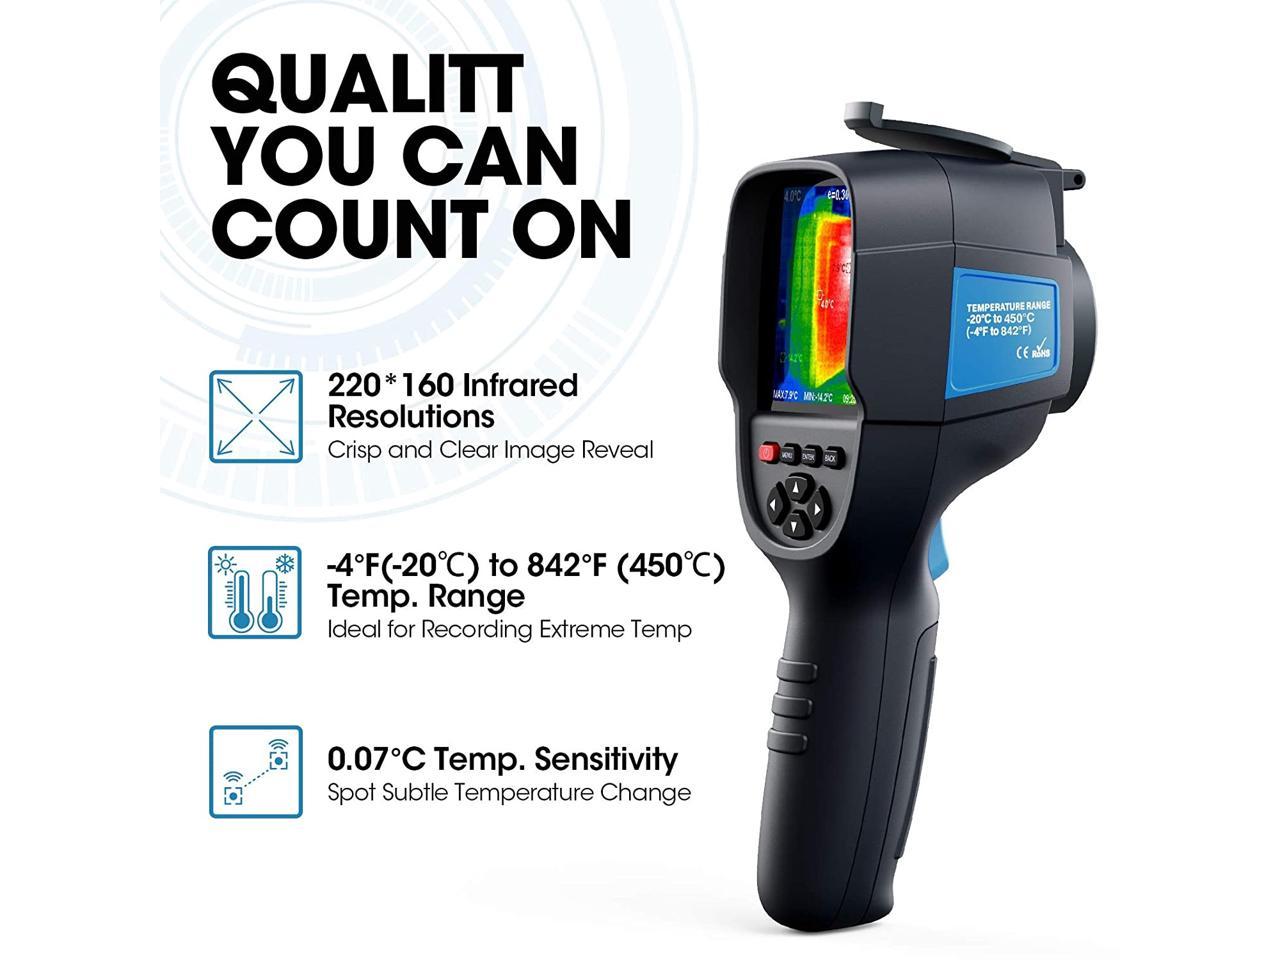 220 x 160 IR Resolution Infrared Thermal Imager Battery Included Handheld 35200 Pixels Thermal Imaging Camera,Infrared Thermometer with 3.2 Color Display Screen 